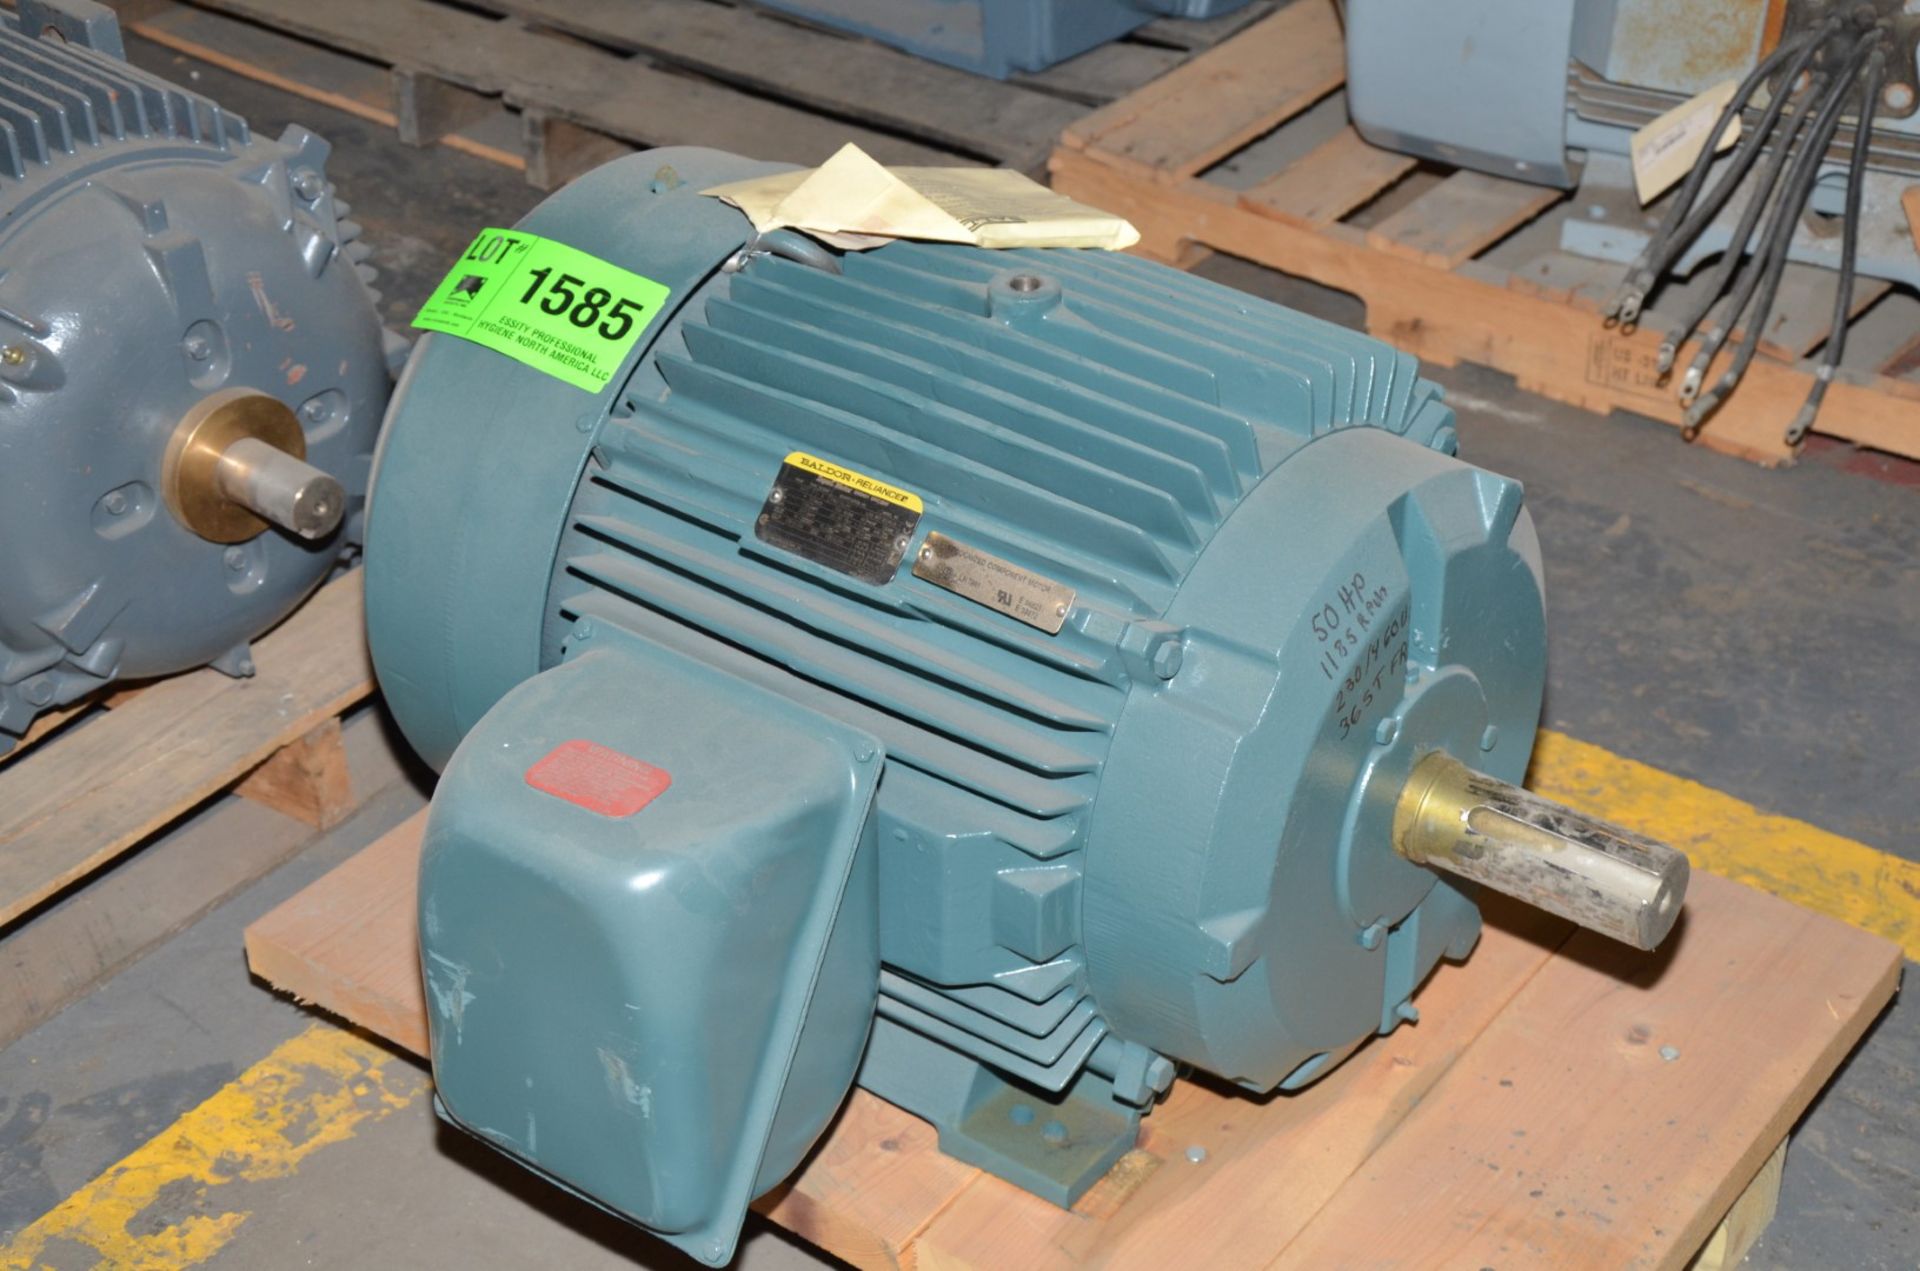 BALDOR 50 HP 1185 RPM ELECTRIC MOTOR [RIGGING FEE FOR LOT #1585 - $50 USD PLUS APPLICABLE TAXES] - Image 2 of 3